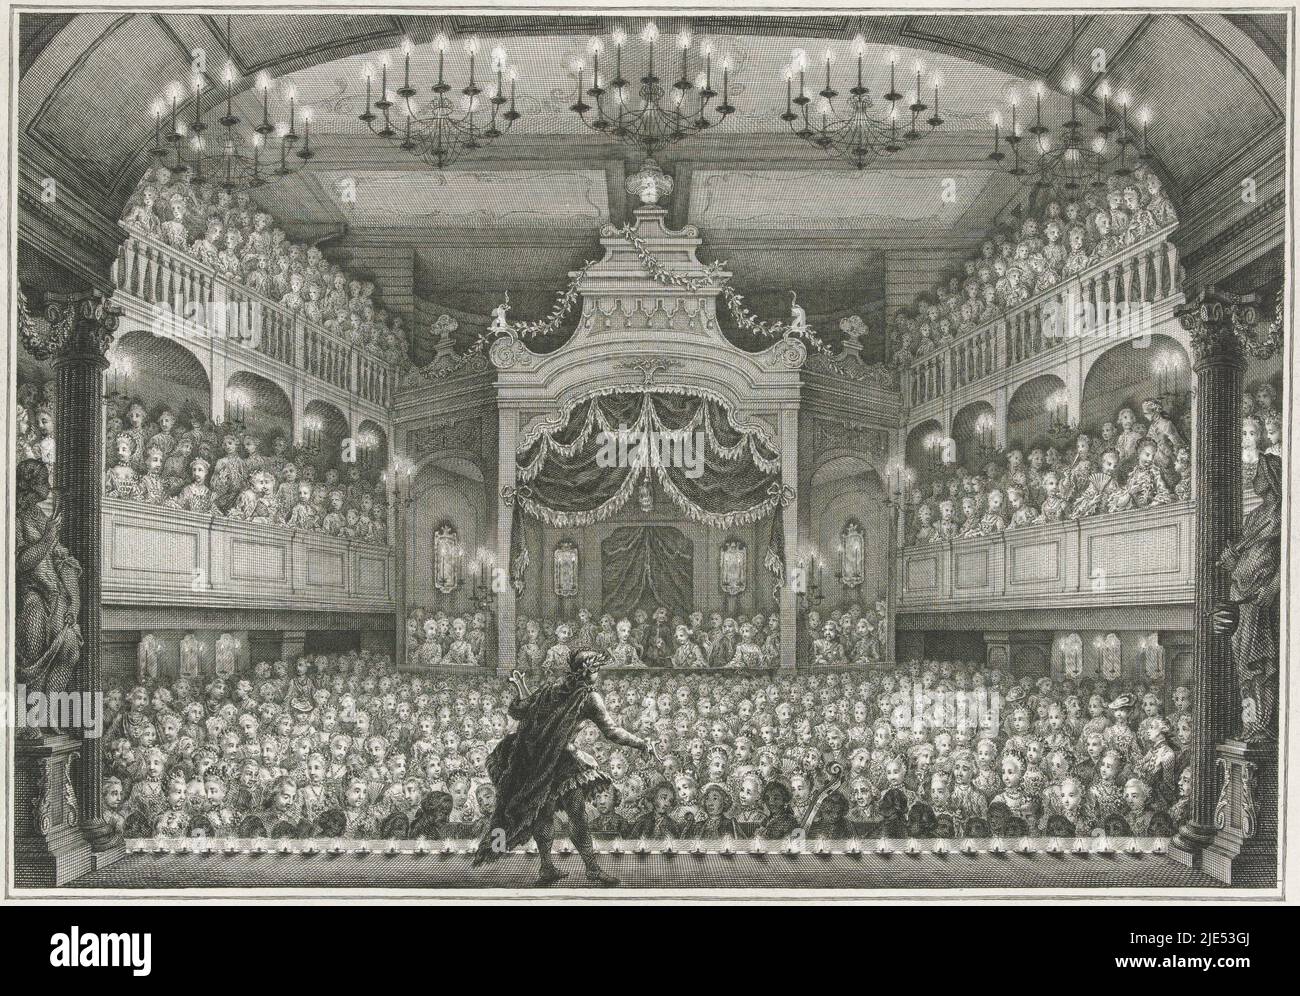 Stadholder William V and Princess Wilhelmina of Prussia attend a theatrical performance in the royal lodge in the new Amsterdam Theatre on Keizersgracht, 1 June 1768. Part of a print series with title print and 14 plates of the inauguration of the prince and princess in Amsterdam, 30 May - 4 June 1768., Princely Lodge in the Amsterdamse Schouwburg for the princely couple, 1768 Image of the Joyful Bedfellows and Pleiades that took place on arrival and during the verblyf (. ...) Willem (...) and zyne Gemaalinne (...) occurred in Amsterdam, on Monday, the 30th of May, and a few days later, in the Stock Photo